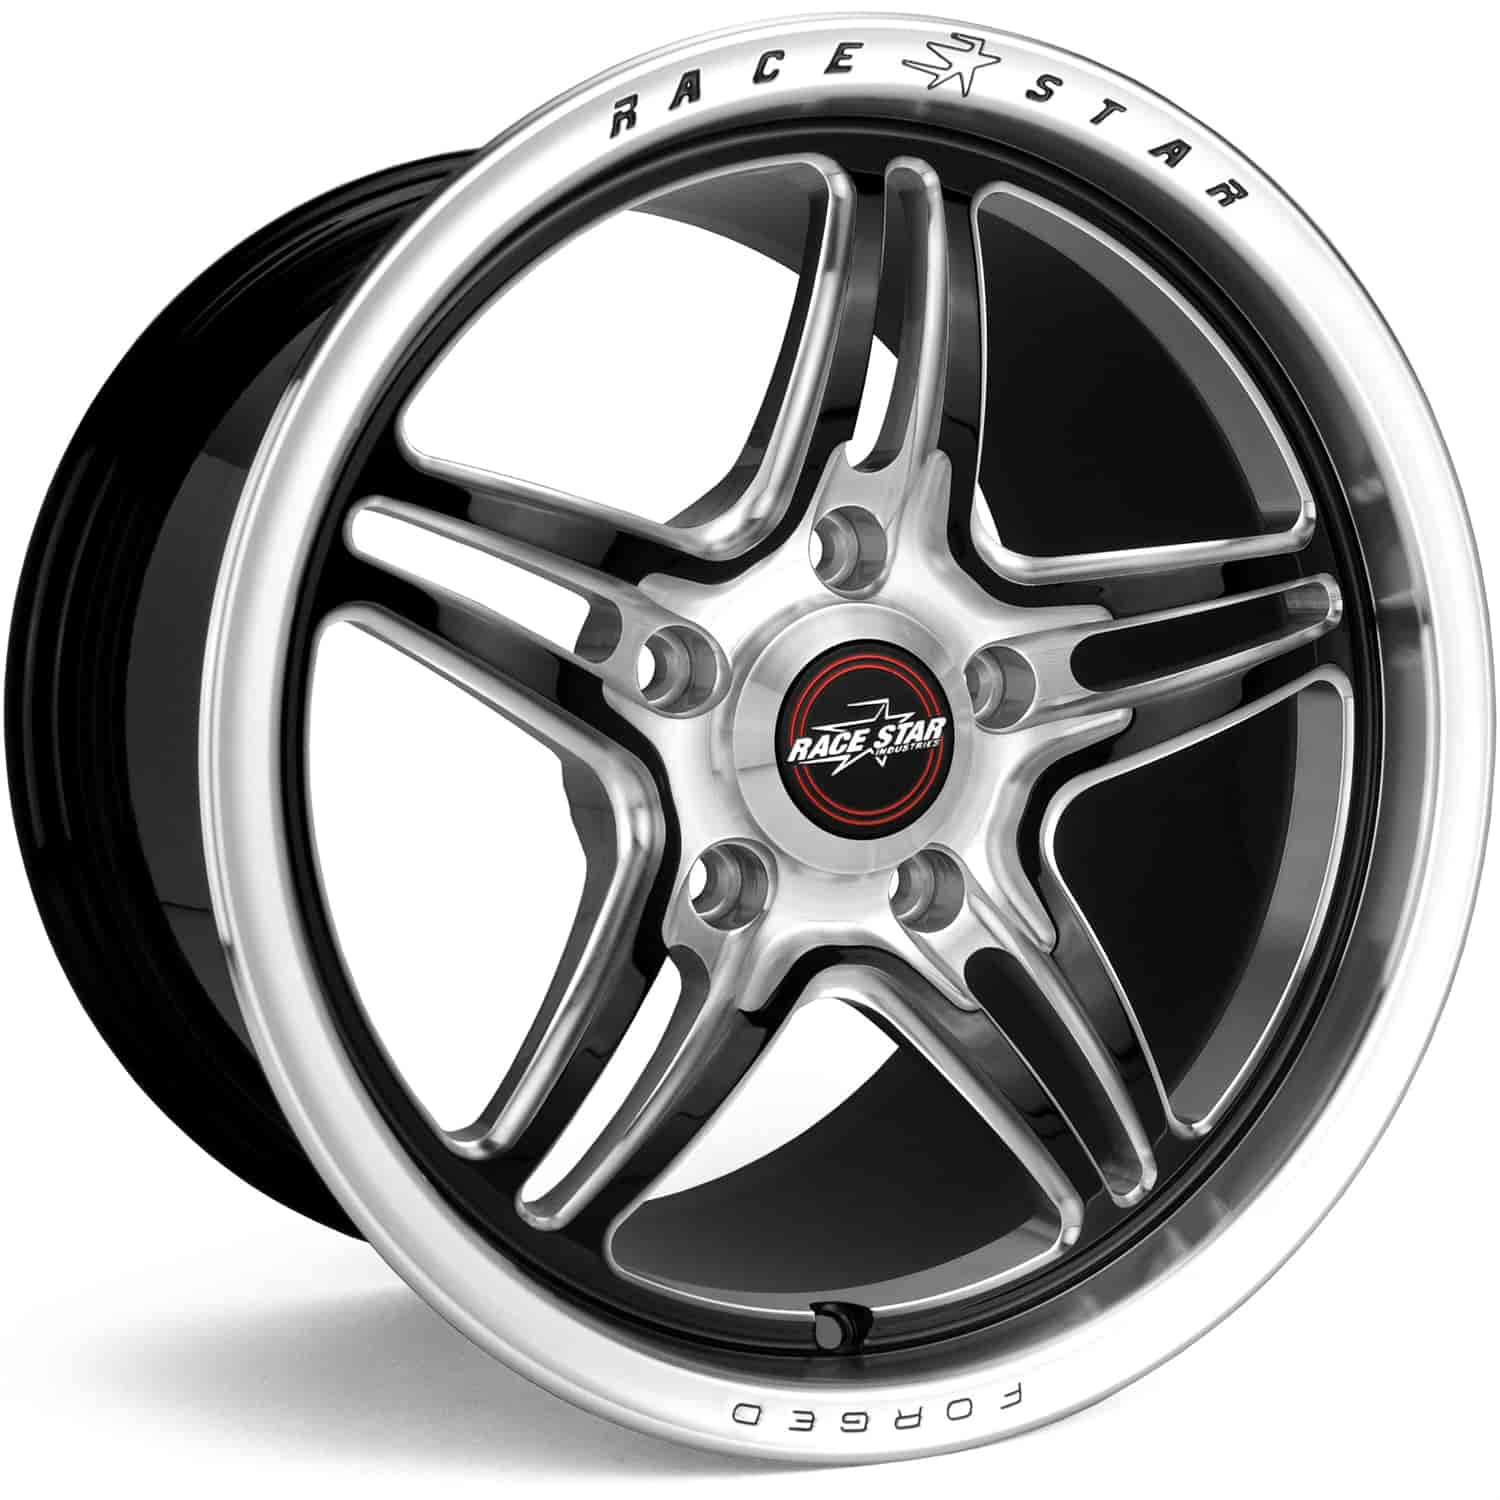 RSF-1 Forged Wheel Size: 17" x 11"